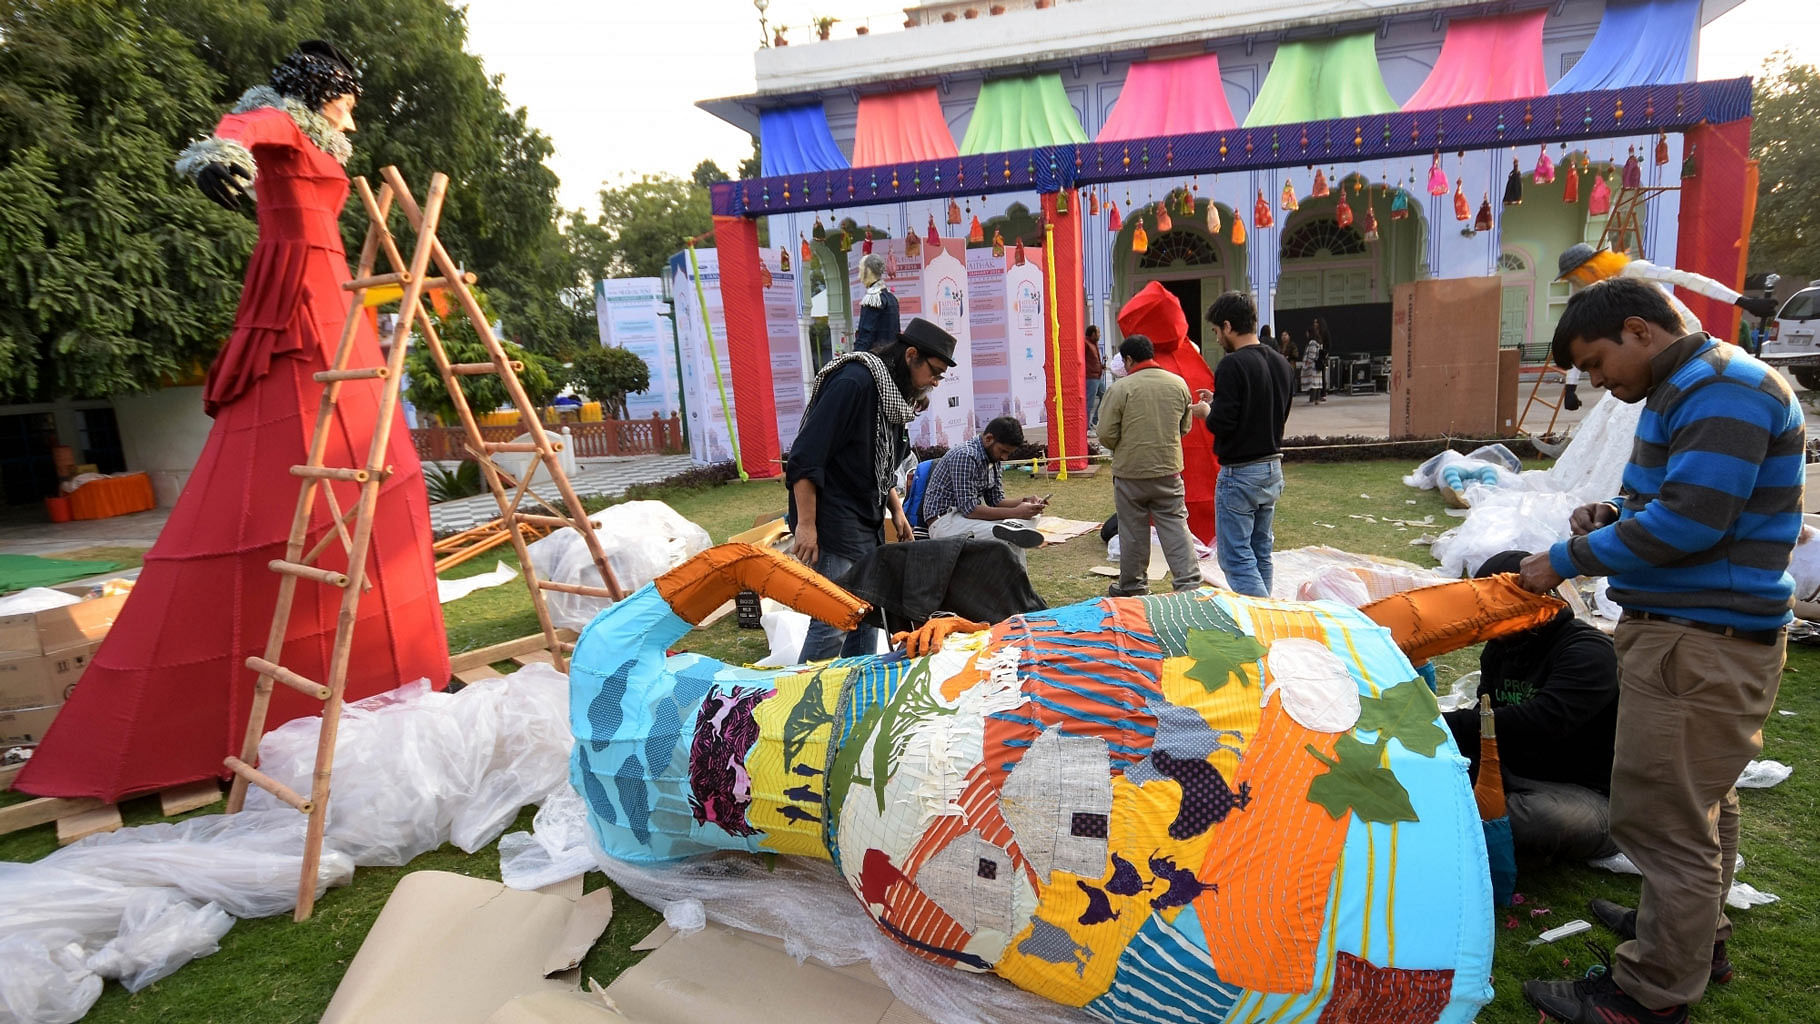 Five-day long Jaipur Literature Festival underway at Diggi Palace in Jaipur. (Photo: IANS)